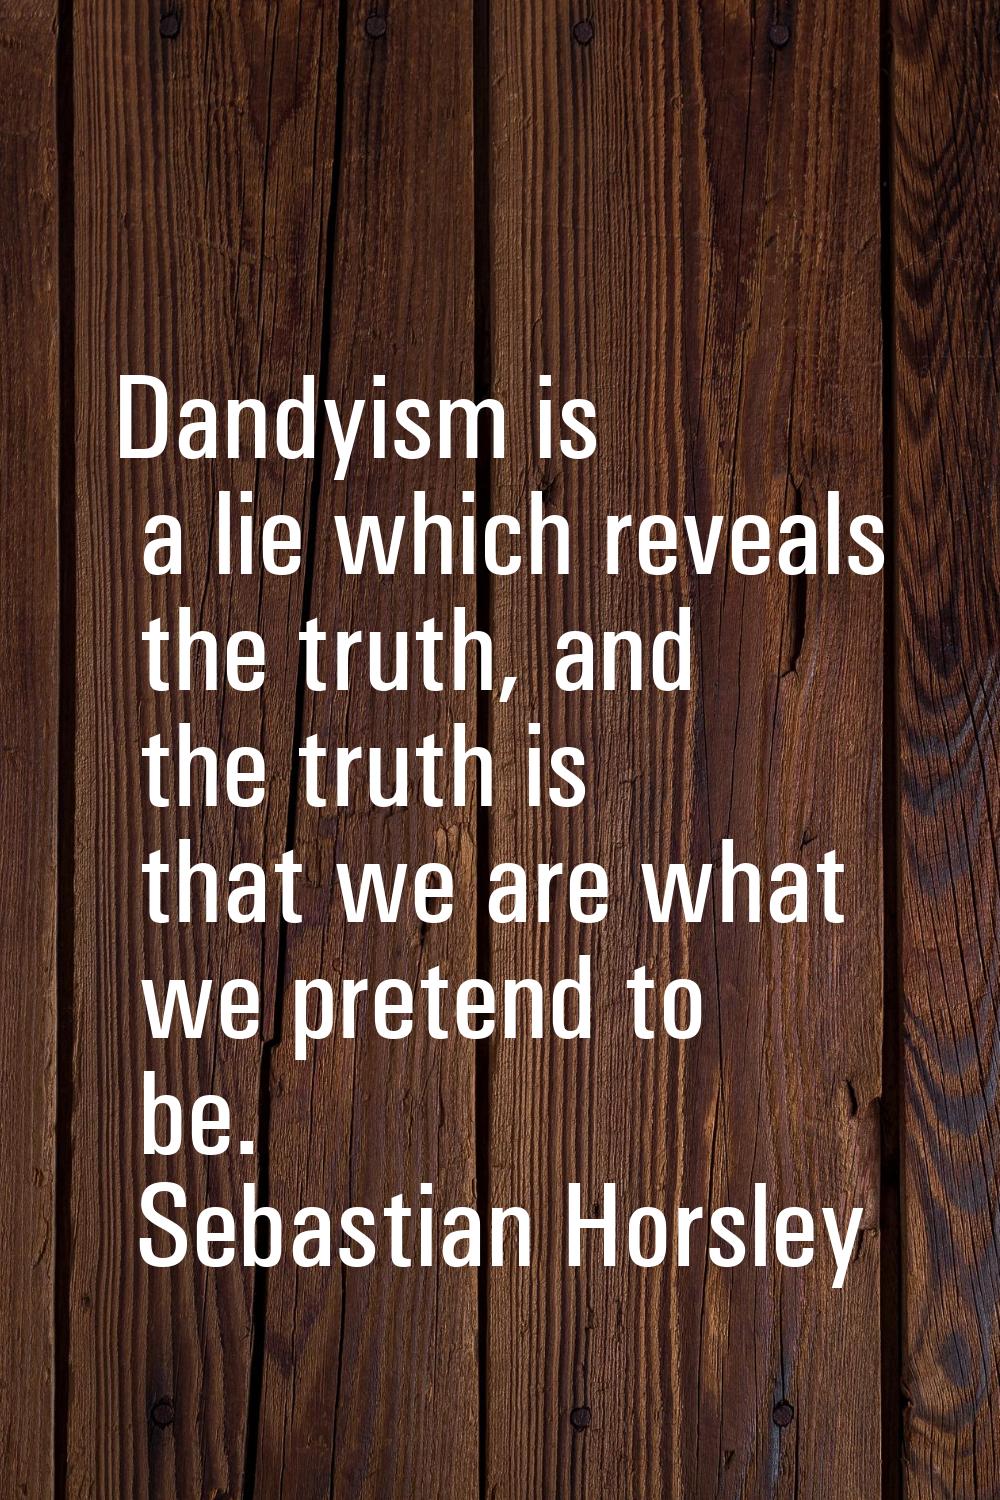 Dandyism is a lie which reveals the truth, and the truth is that we are what we pretend to be.